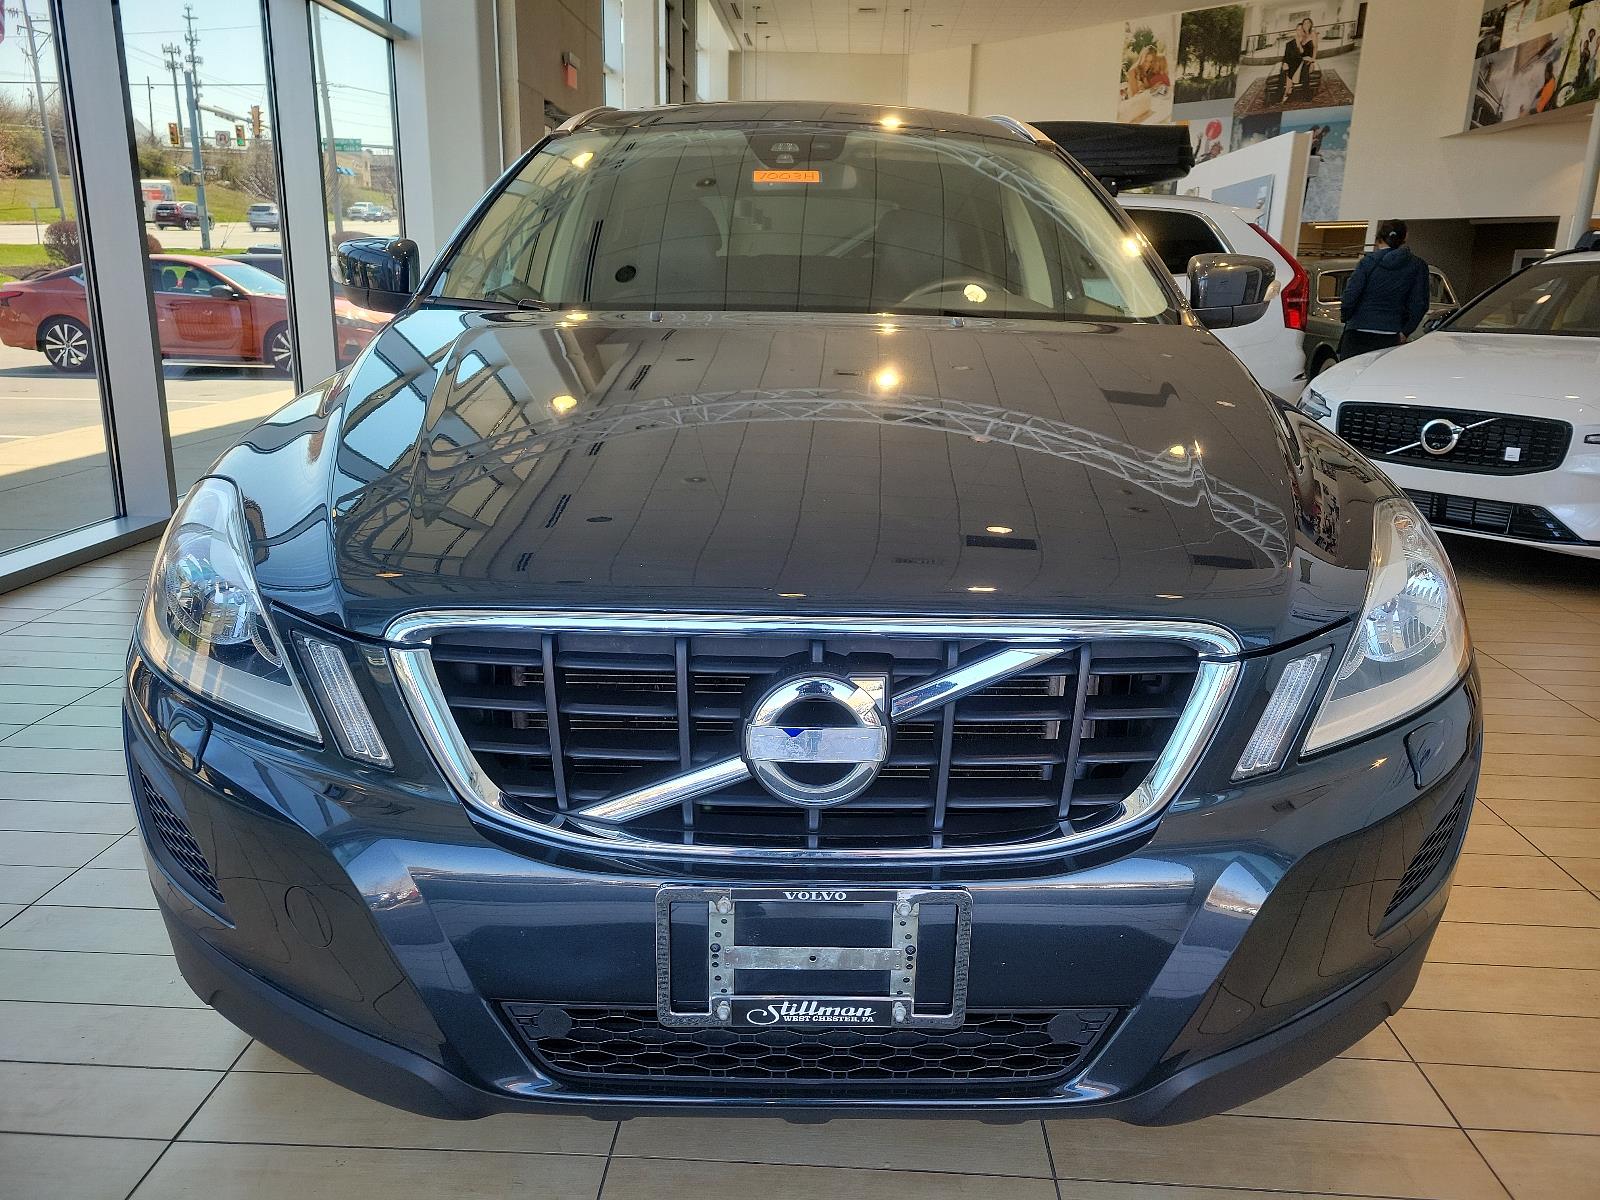 Used 2012 Volvo XC60 3.2 with VIN YV4940DZXC2268466 for sale in West Chester, PA